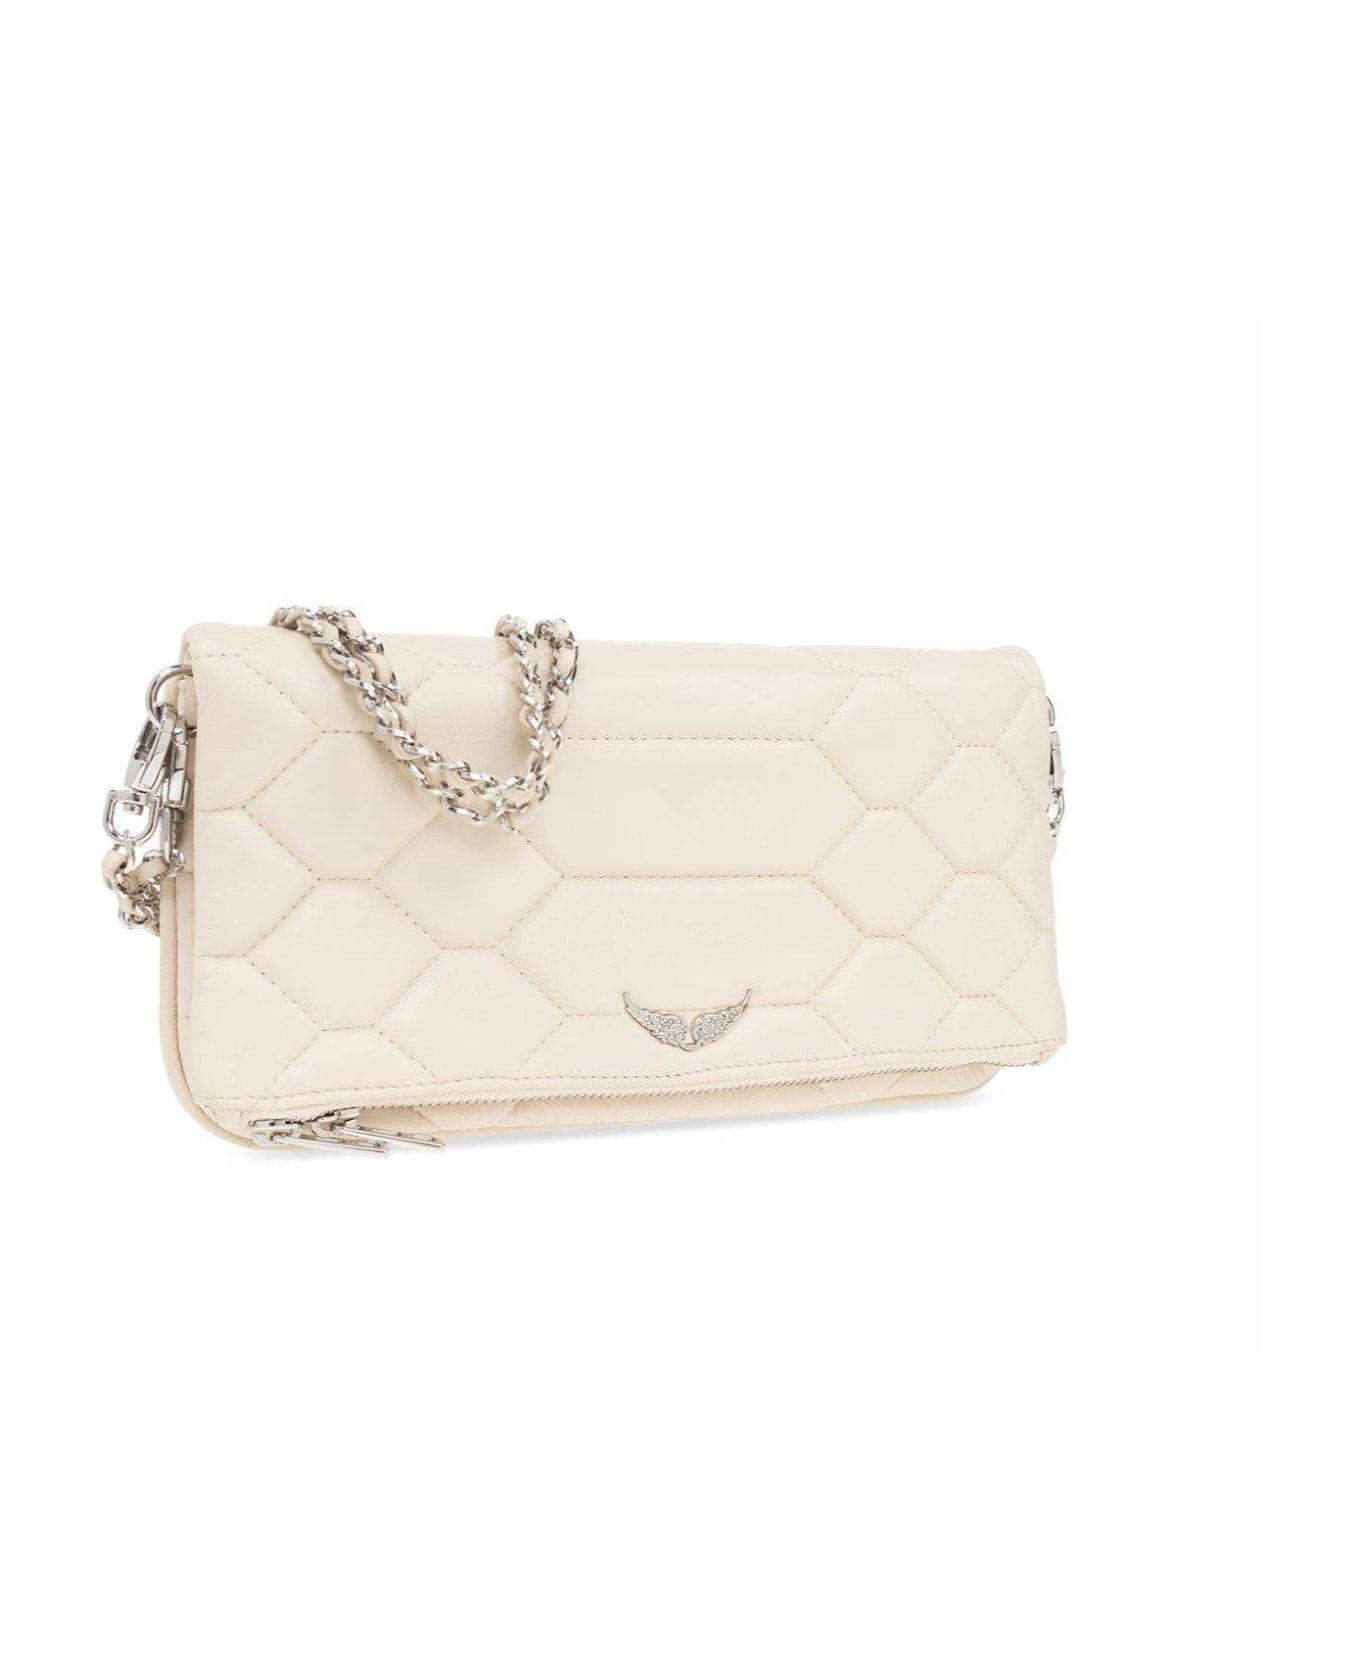 Zadig & Voltaire Rock Xl Quilted Clutch Bag - Cream ショルダーバッグ